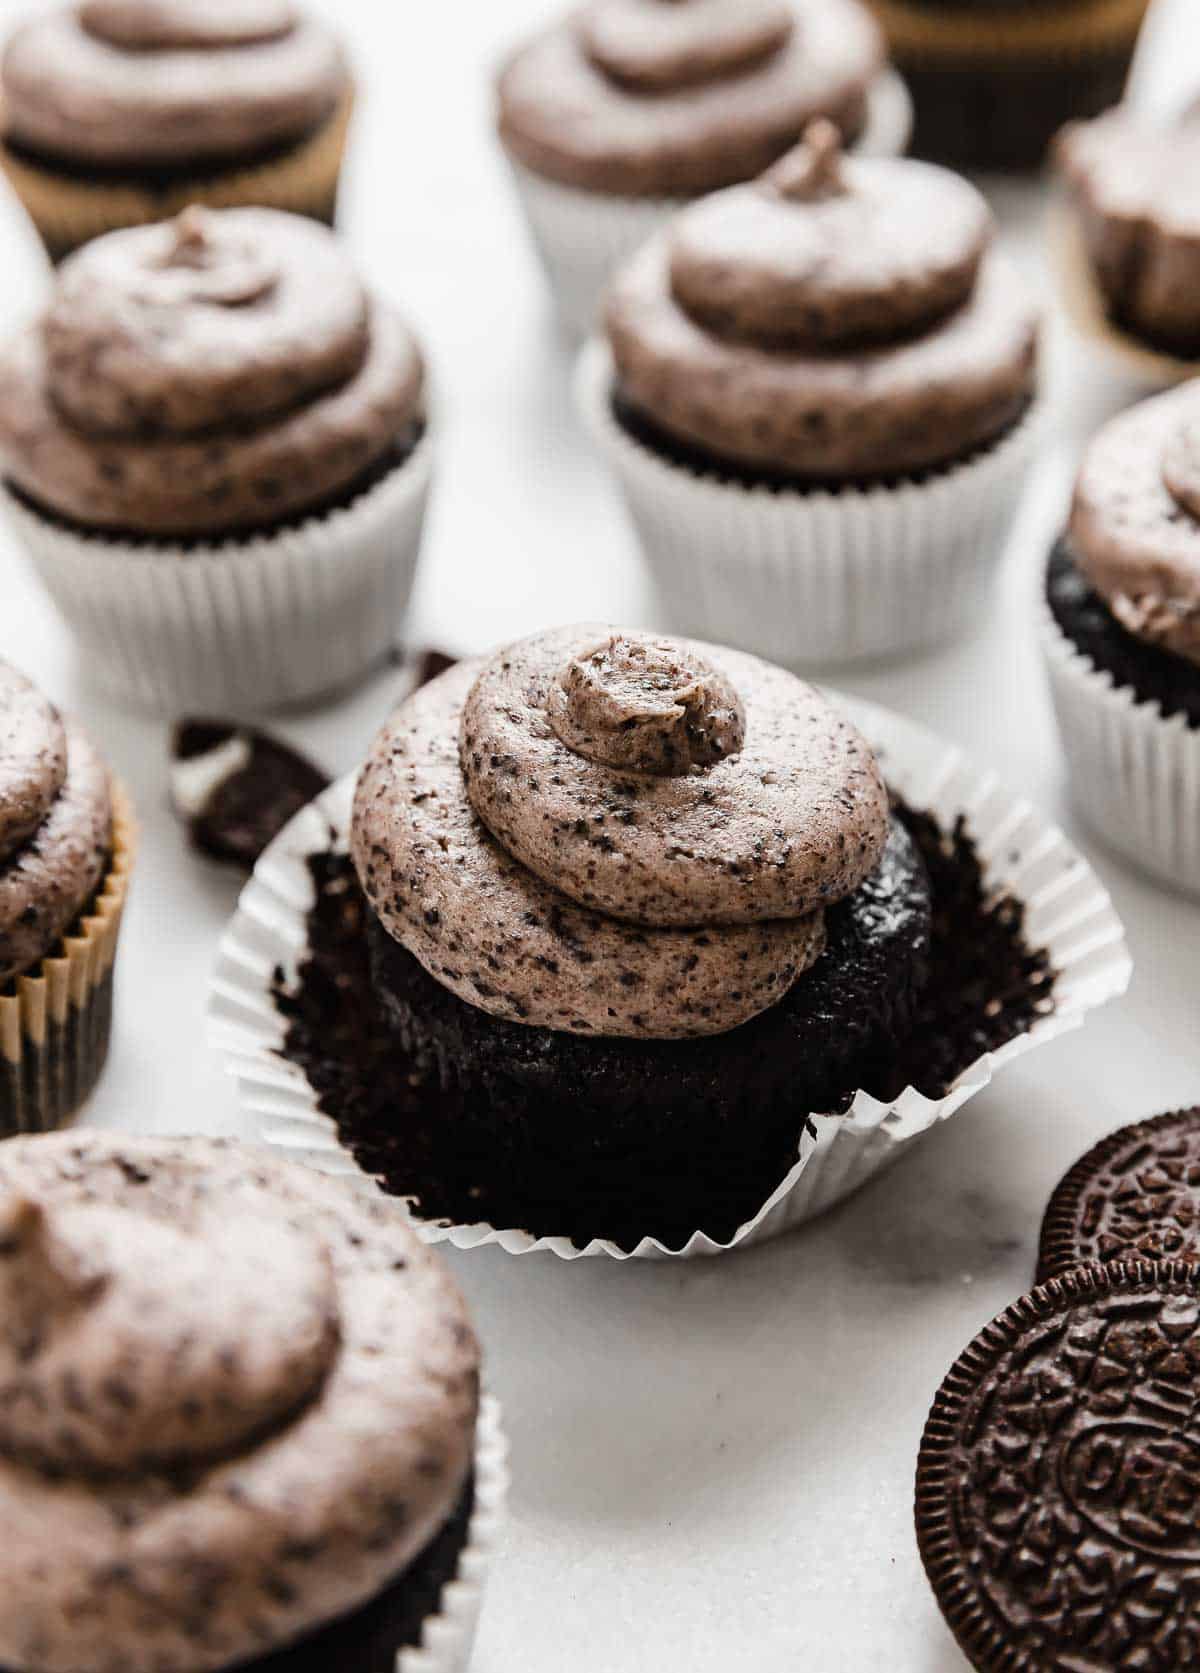 Oreo Cupcakes on a white background, each cupcake topped with a swirl of Oreo frosting.